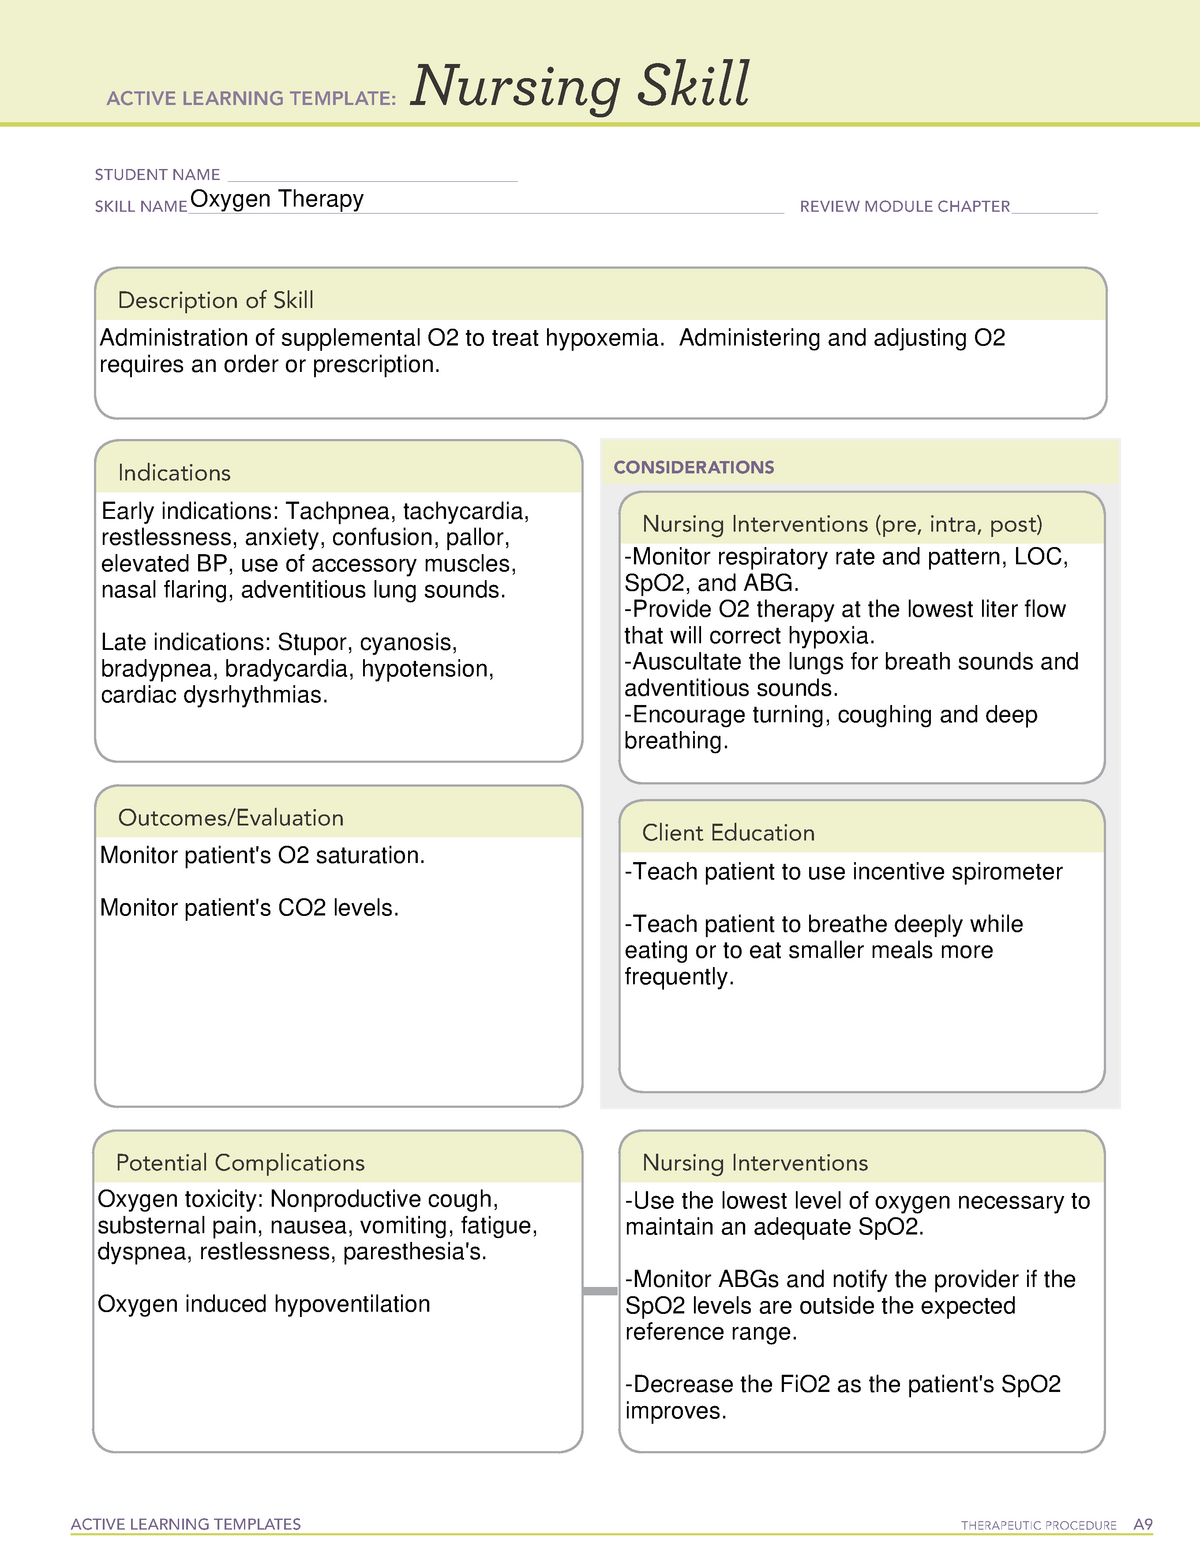 Oxygen Therapy ATI Template ACTIVE LEARNING TEMPLATES THERAPEUTIC